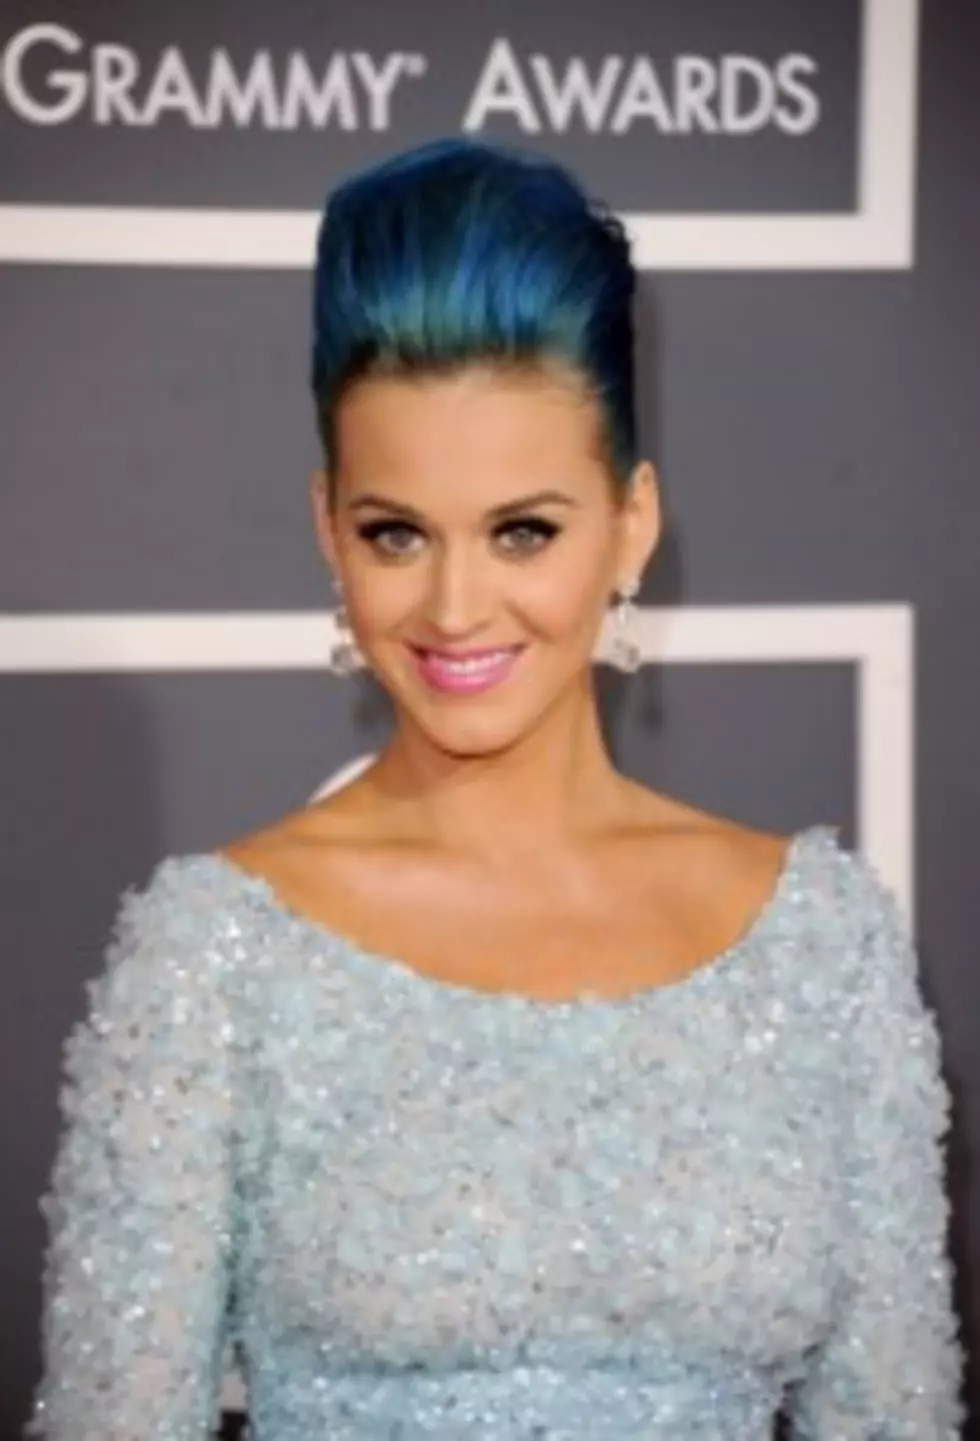 Katy Perry has a 3D Concert Movie On The Way and Here Is the Sneek Peek [VIDEO]